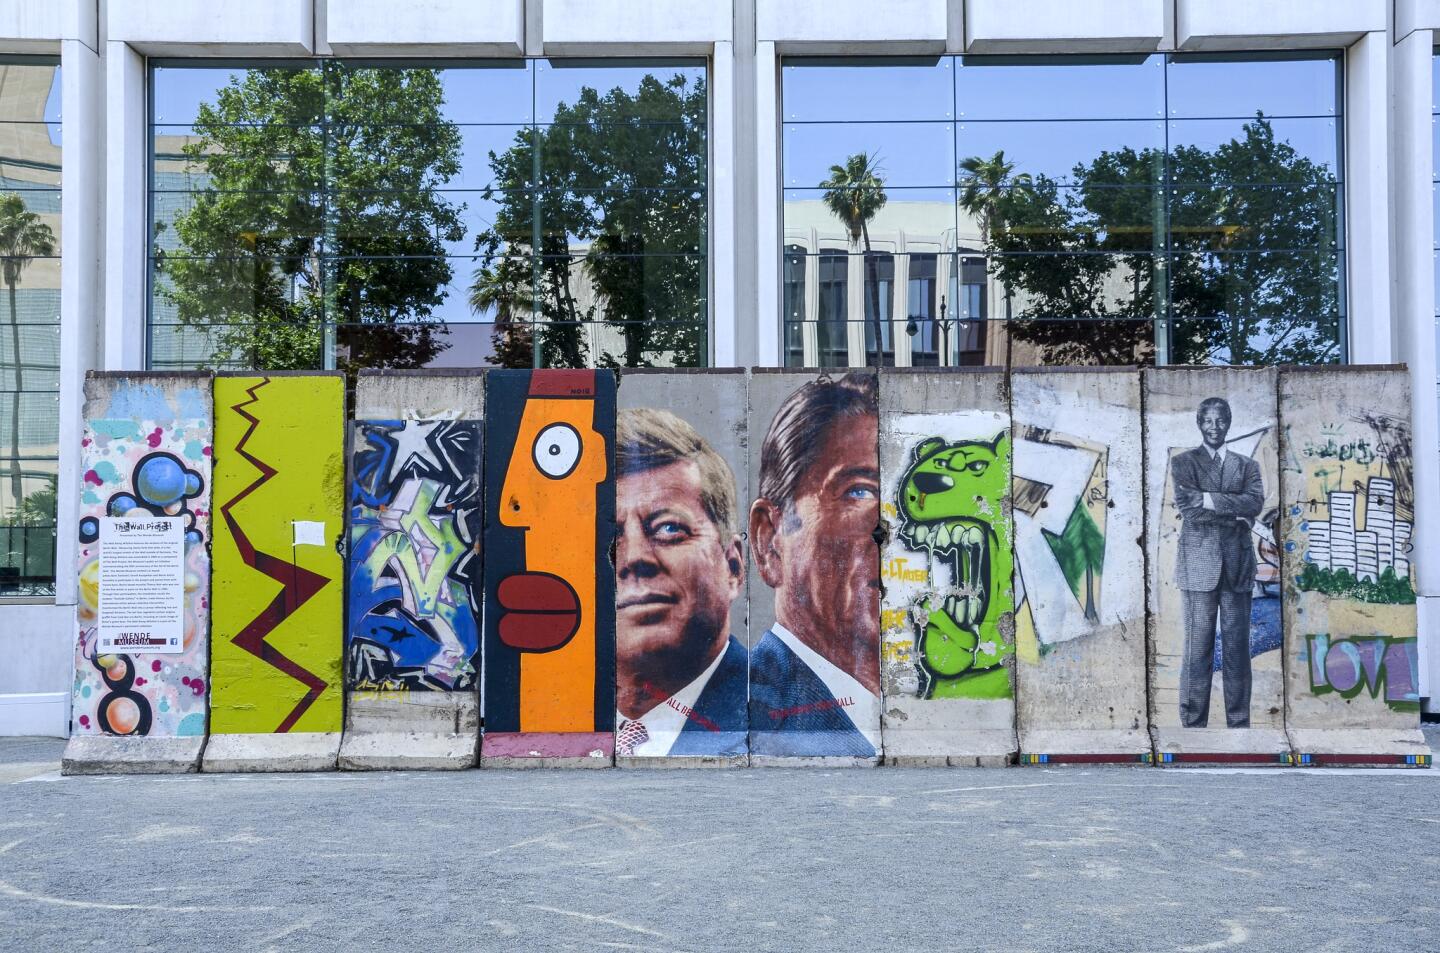 Segments of the Berlin Wall are displayed at 5900 Wilshire Blvd. in Los Angeles. Presented by the Wende Museum.